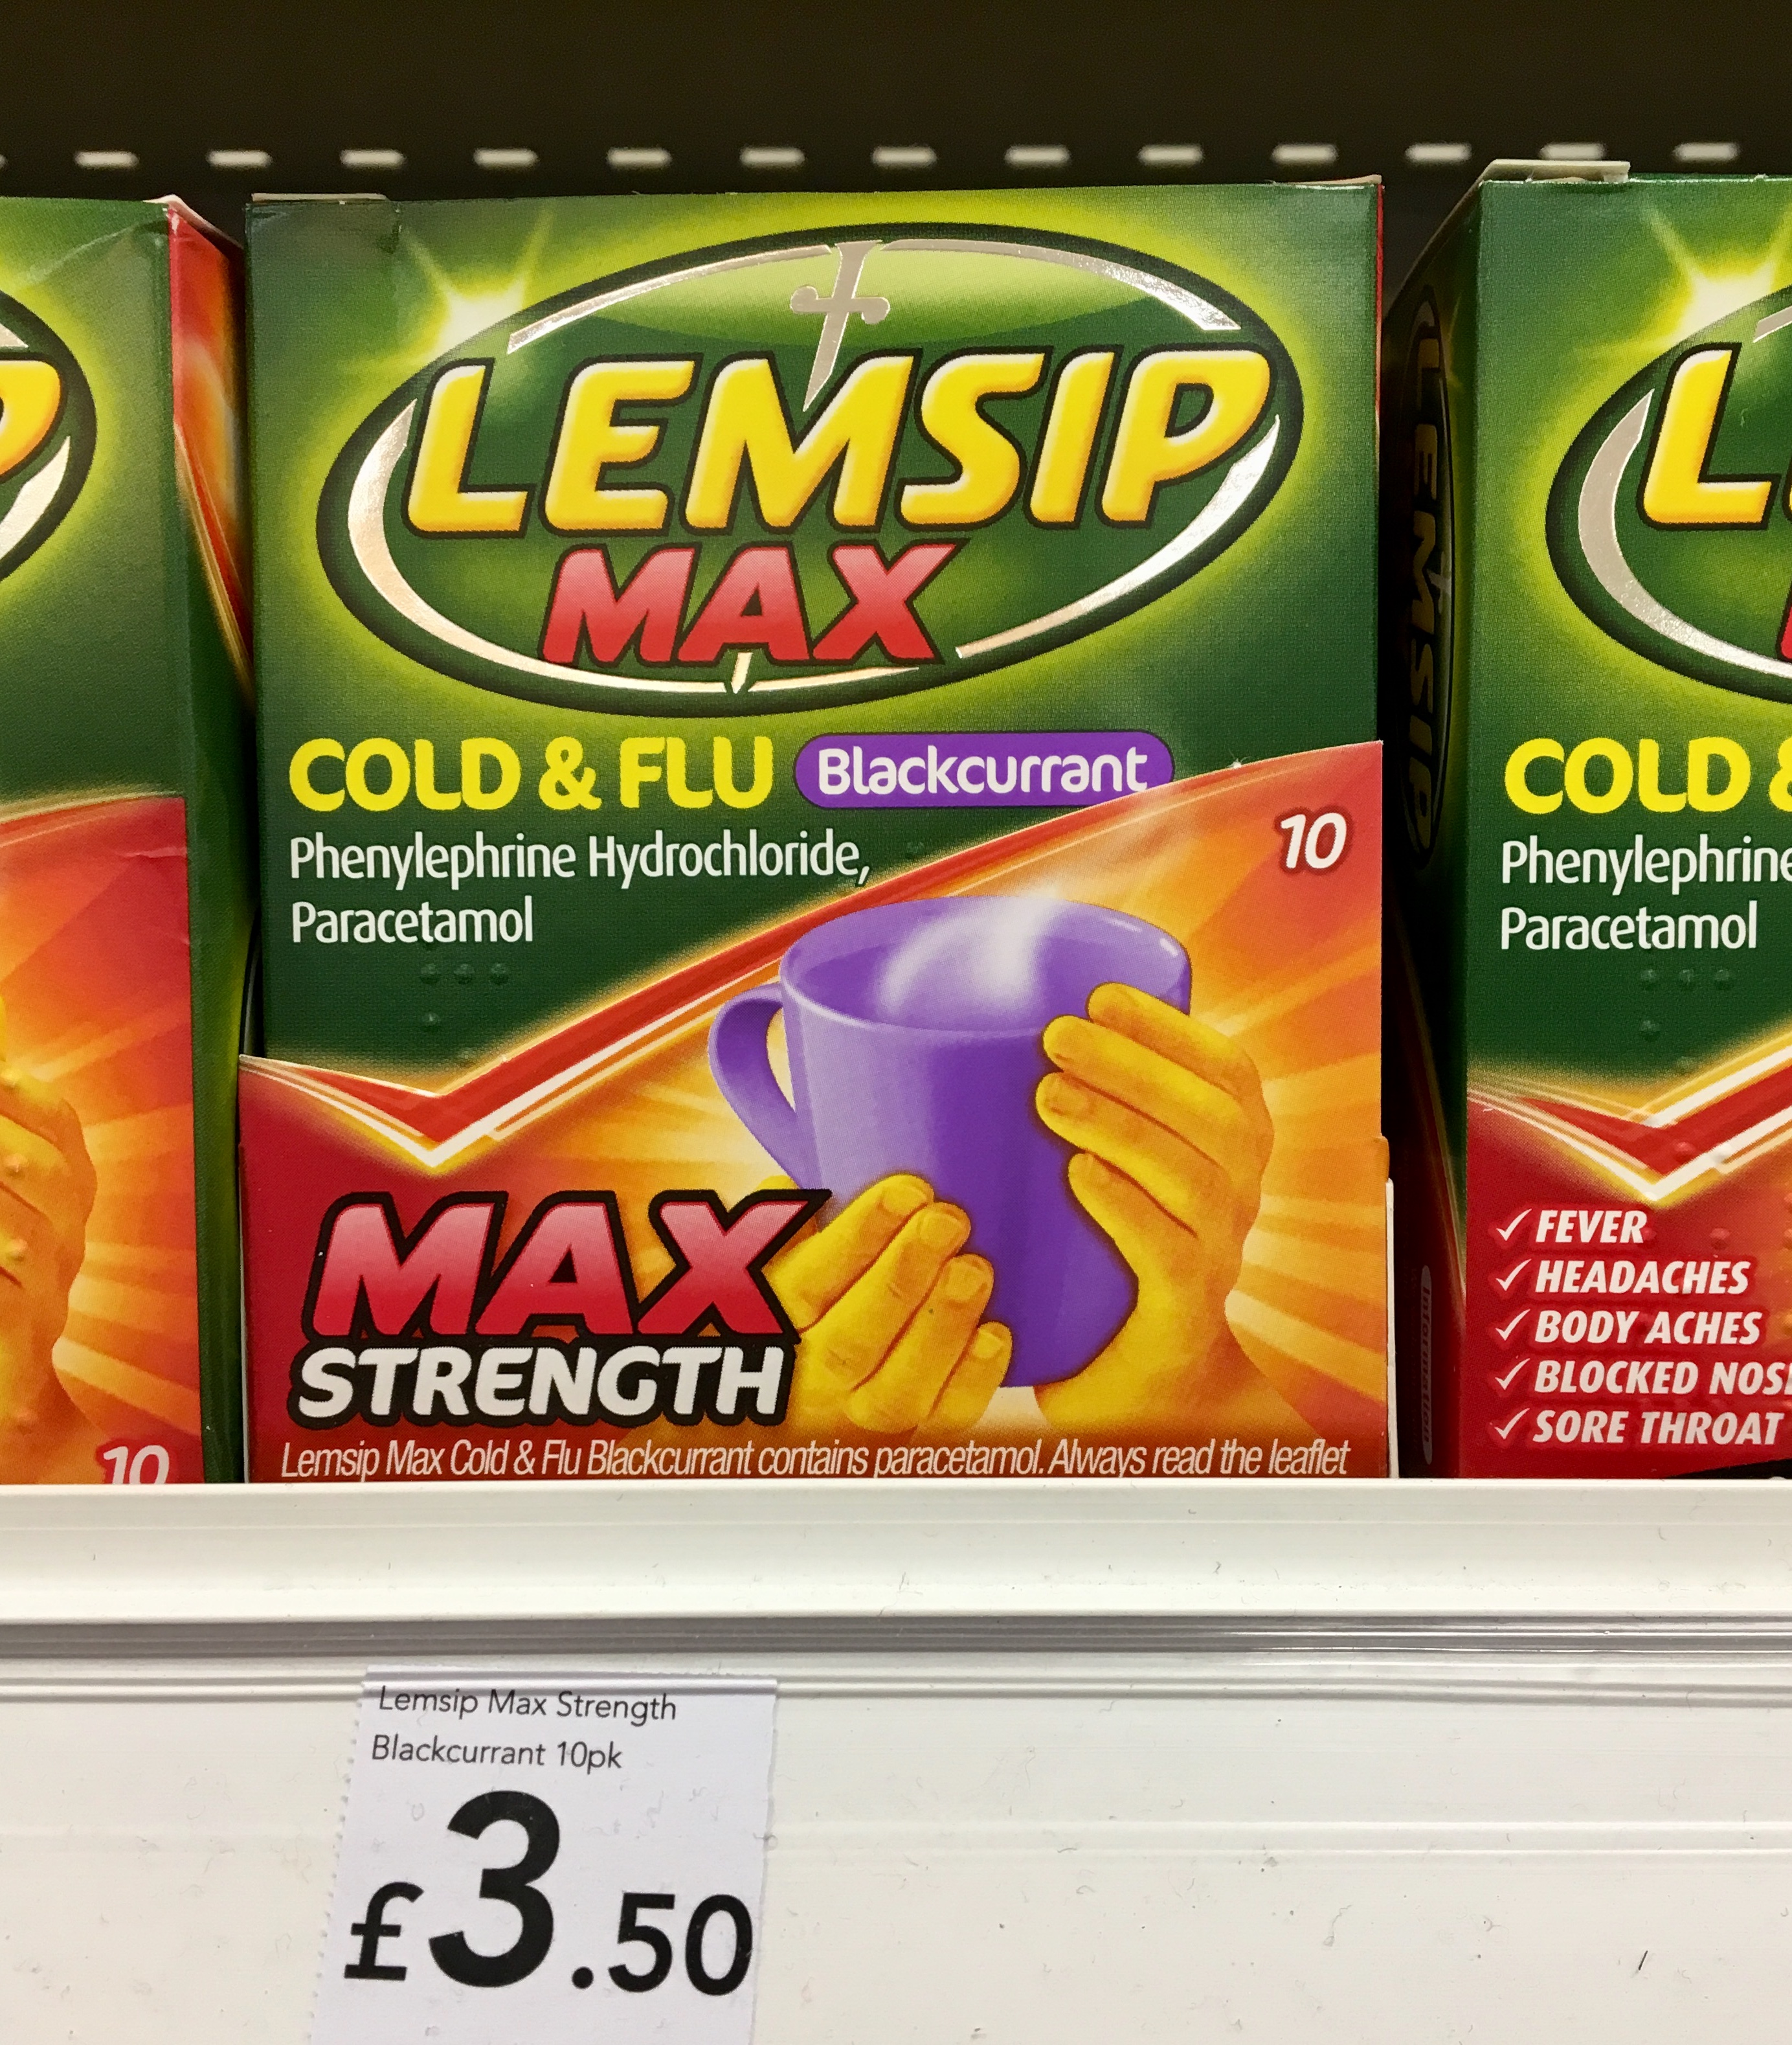 Are branded cold remedies worth the extra?